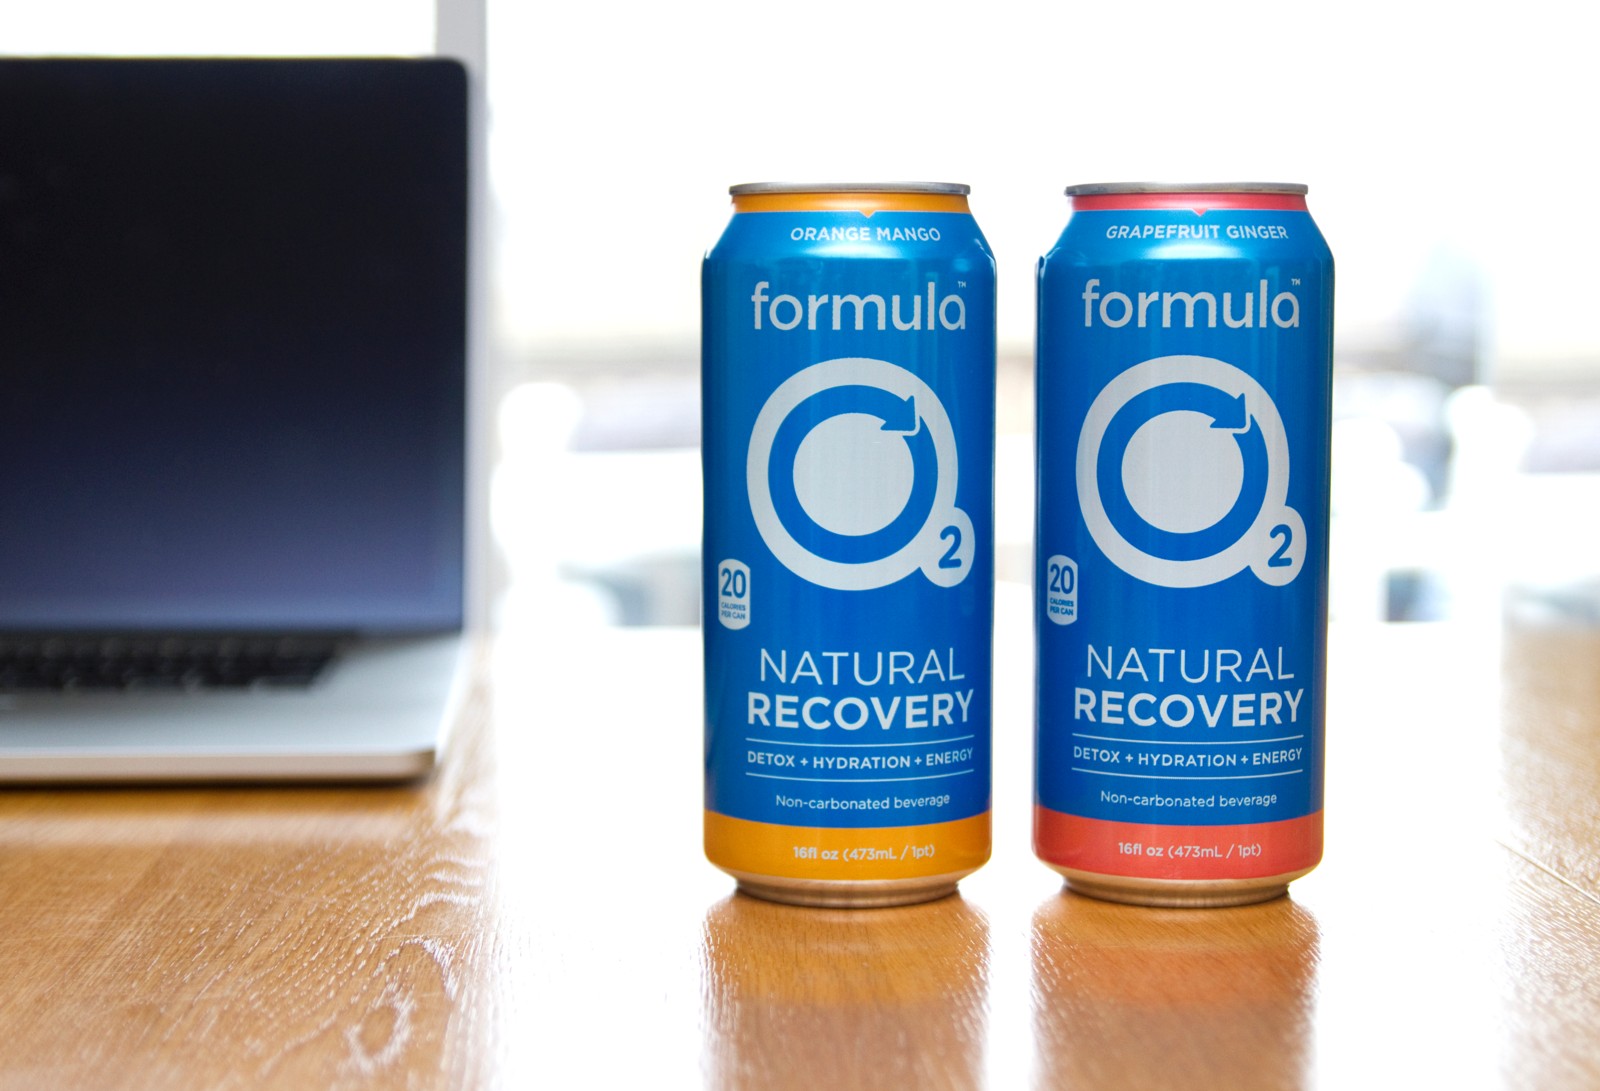 Rexam Designs Aluminum Cans for New Formula O2 Oxygenated Drinks